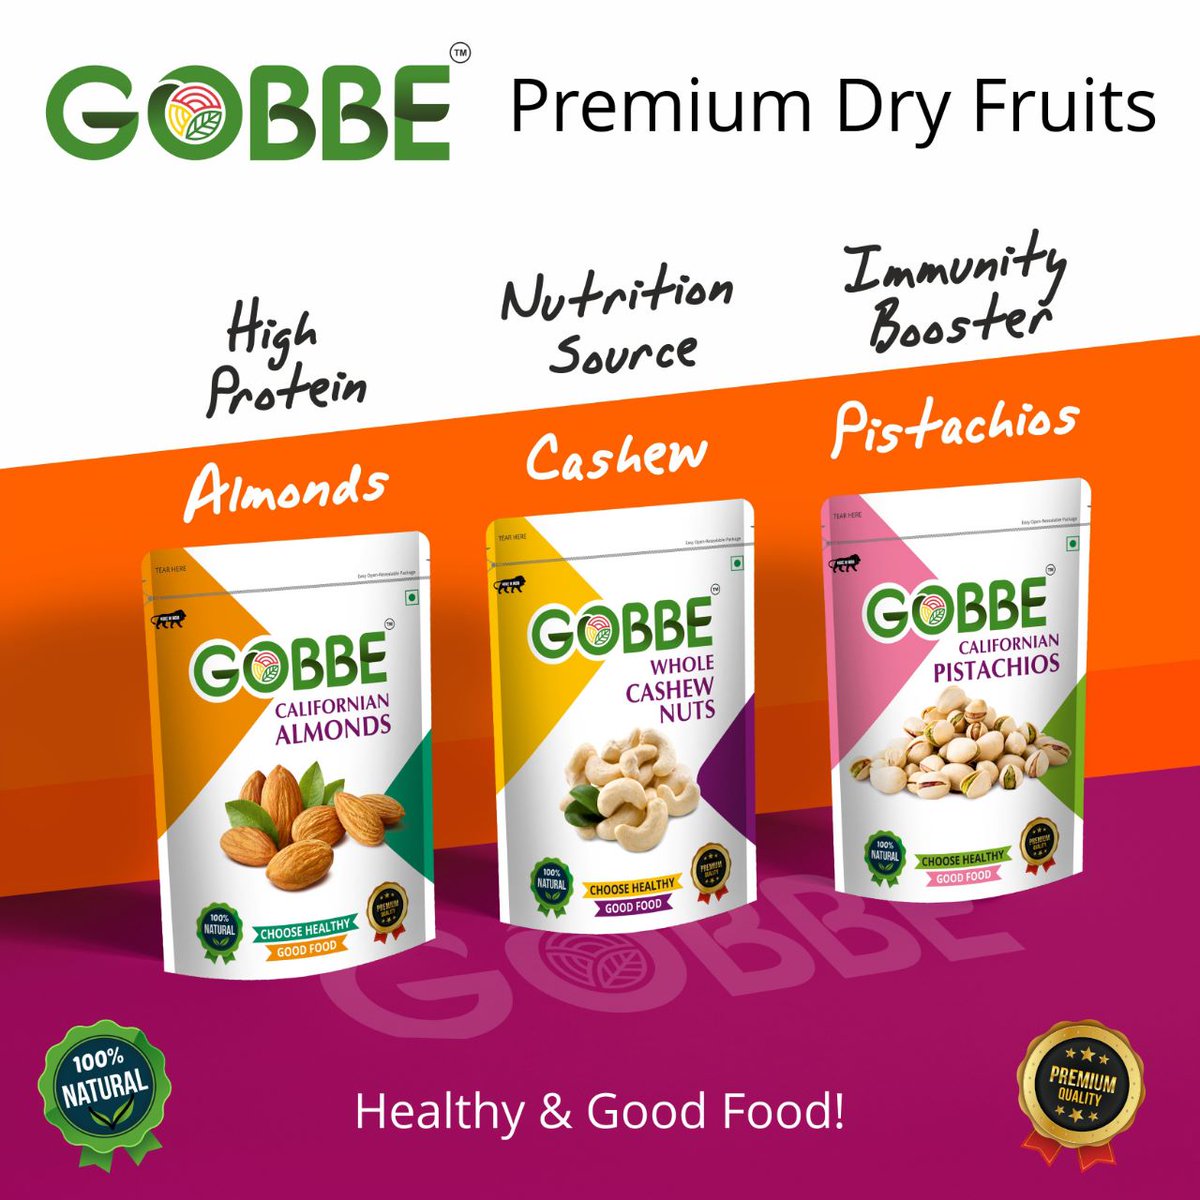 Agree? You dont have to eat less, you just have to eat right!!
#GobbeDryFruits #PremiumDryFruits #Gobbe #GobbeSnacking #GoodFood #DryFruits #FitnessFood #FitFood #HealthyFood #Almonds #HealthyLifestyle #DryfruitsAndNuts #FoodBlogger #HealthySnacks #HealthyEating #FoodForGood